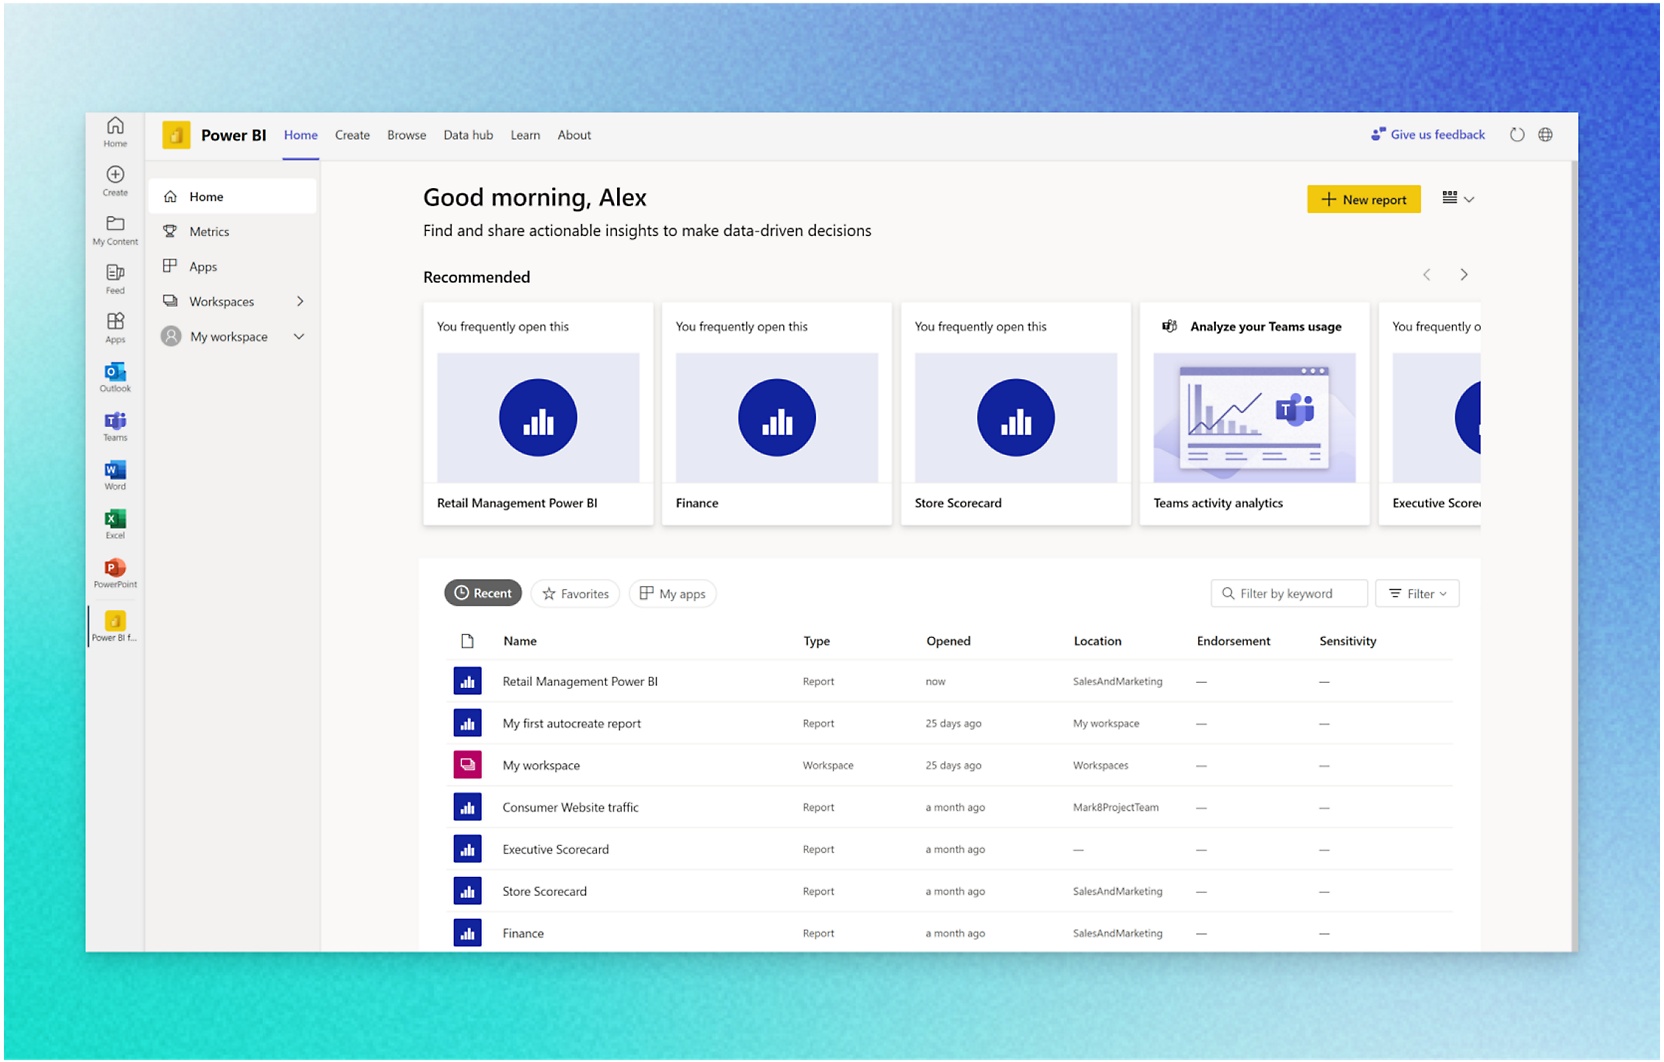 Power BI Home with options to create, browse, and view data hubs, featuring recent reports and workspaces.